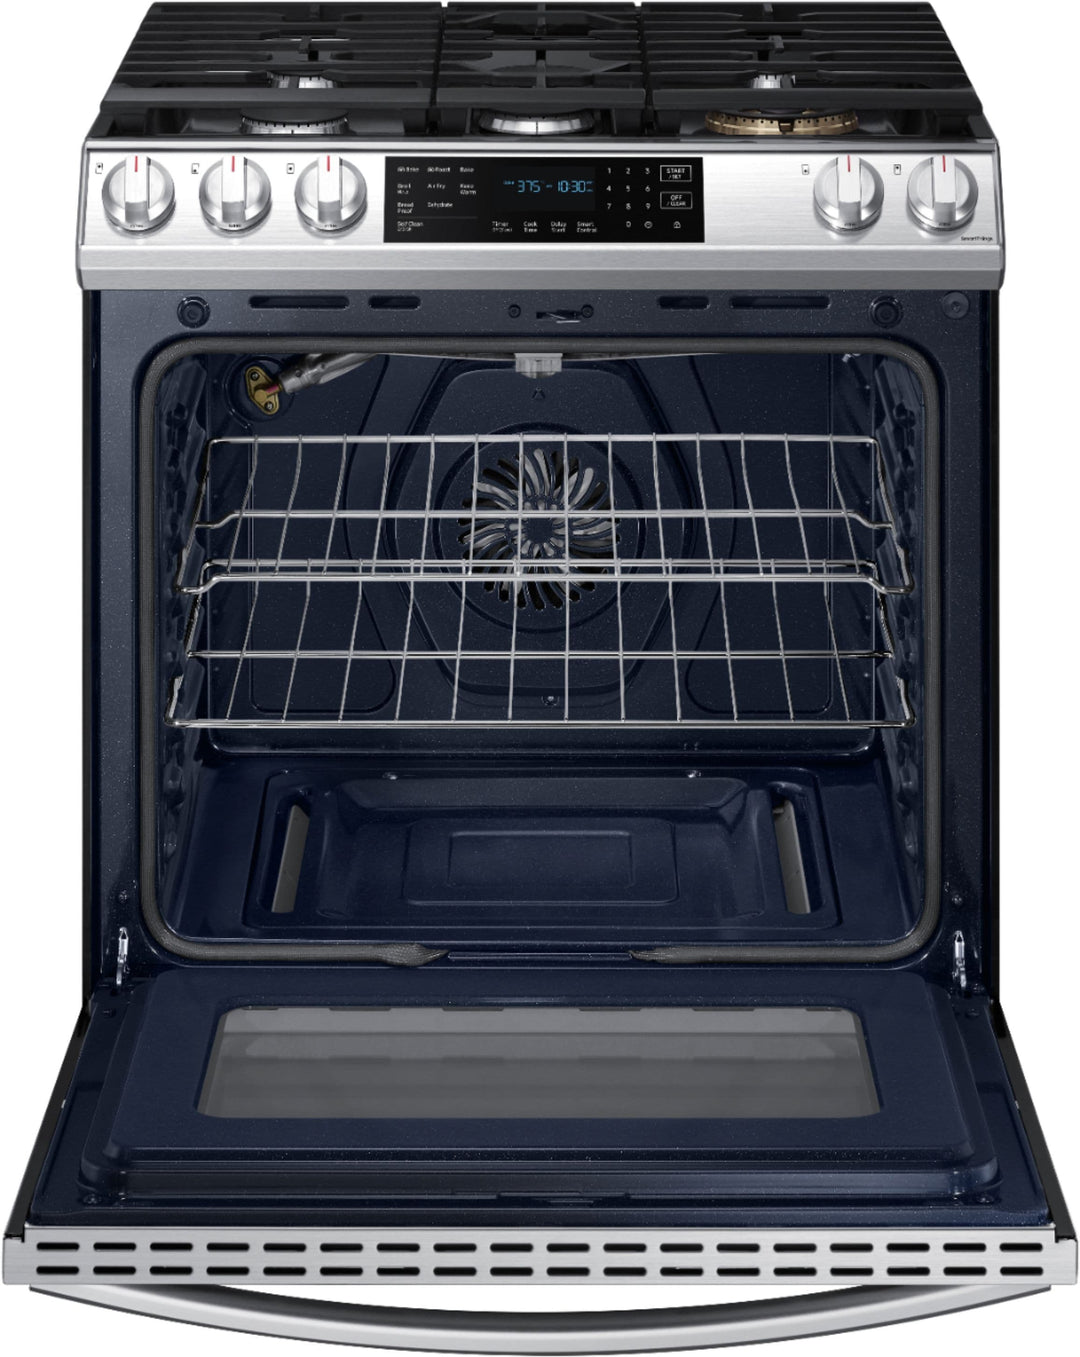 Samsung - 6.0 cu. ft. Front Control Slide-In Gas Convection Range with Air Fry & Wi-Fi, Fingerprint Resistant - Stainless steel_9